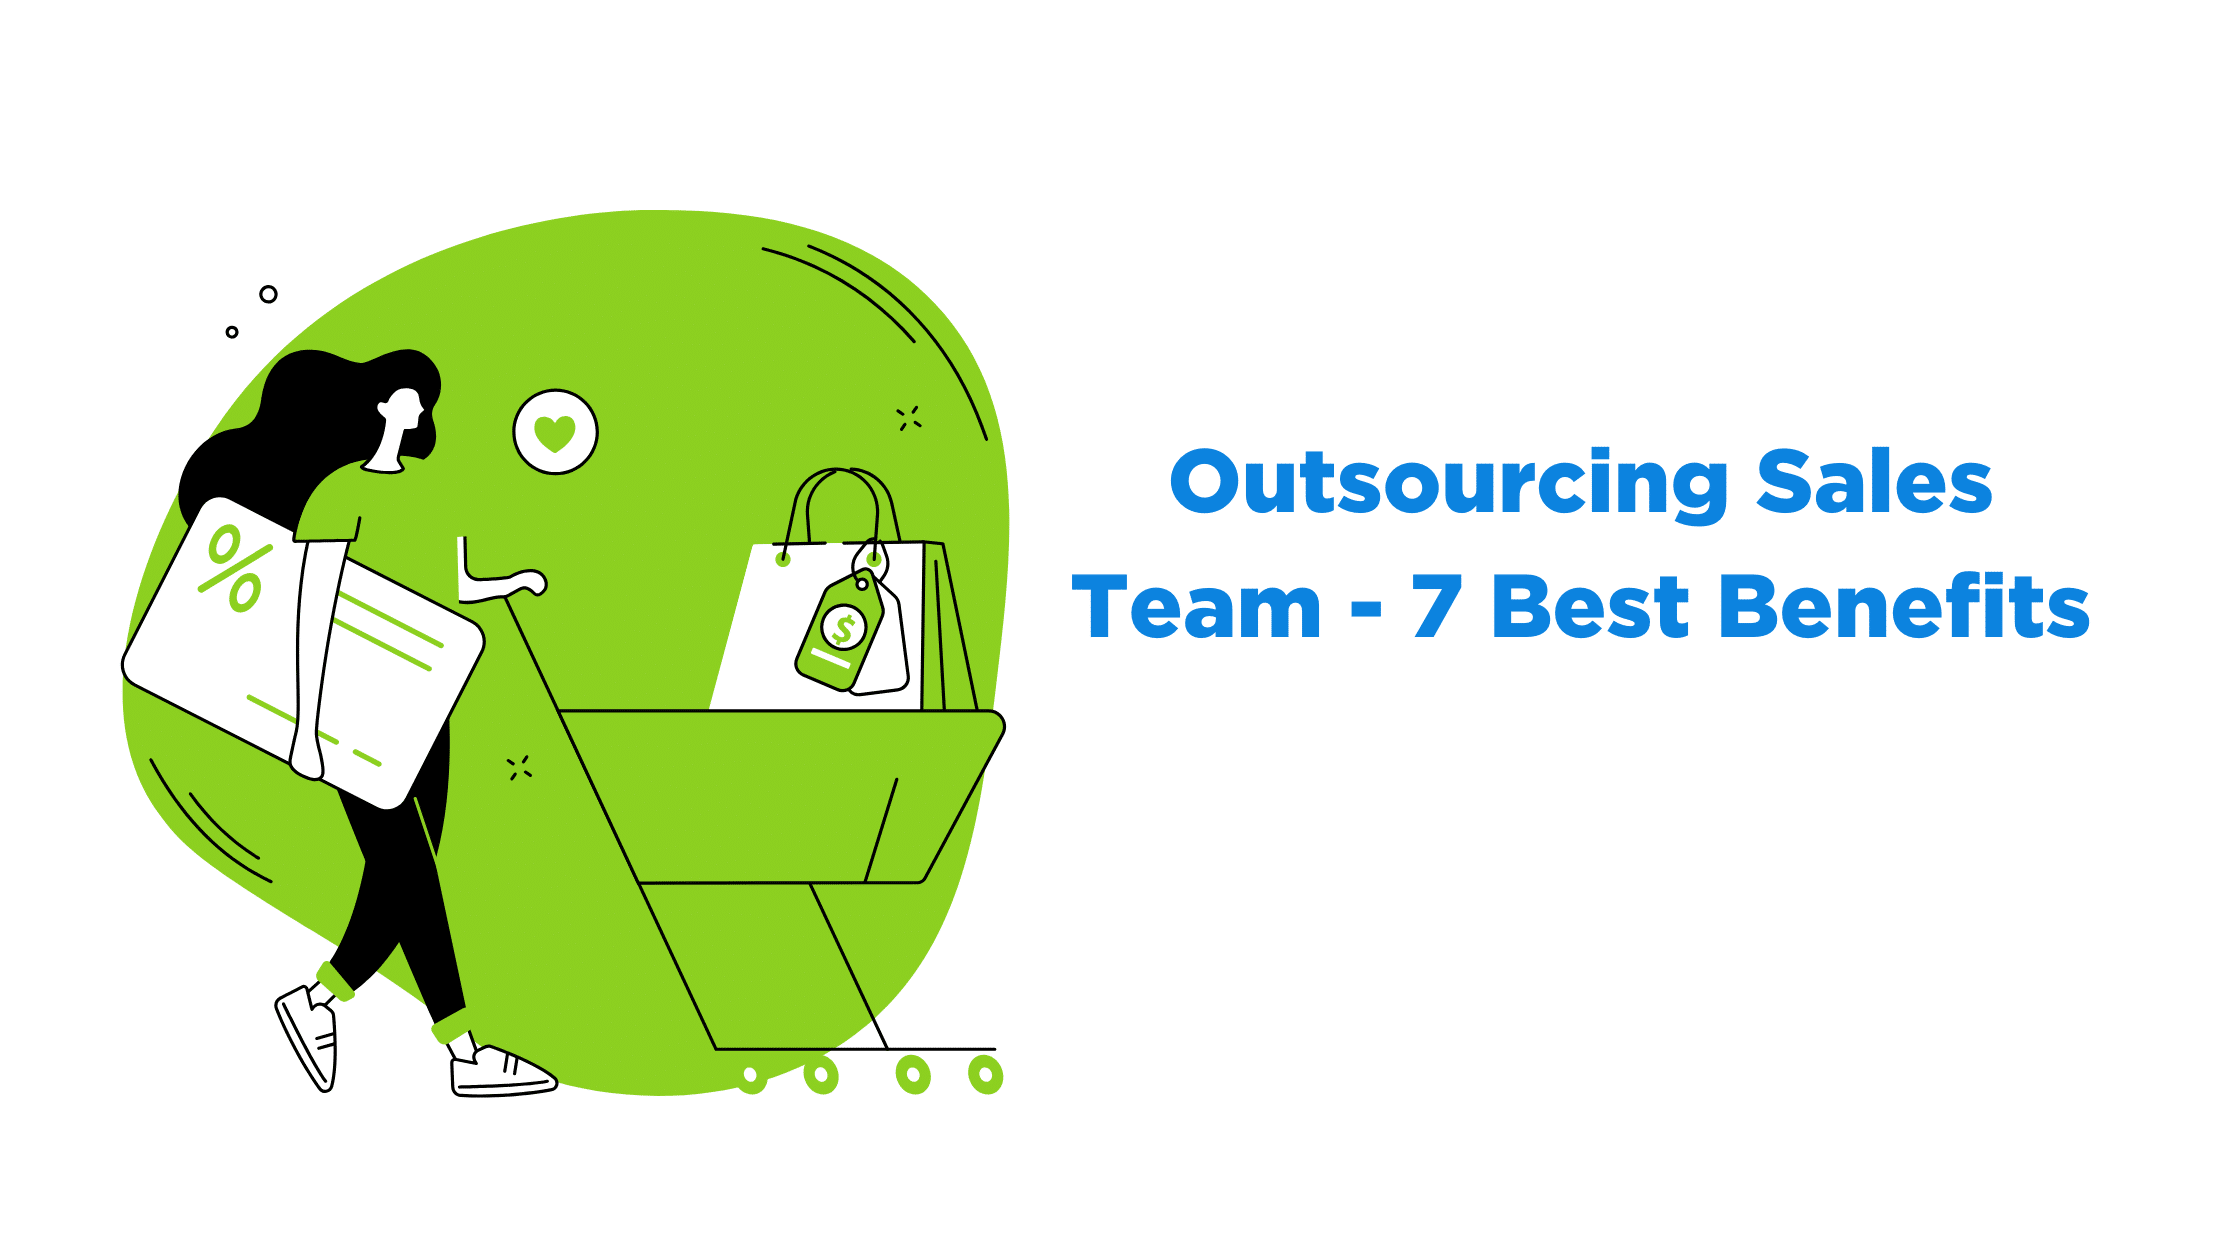 Outsourcing Sales Team - 7 Best Benefits